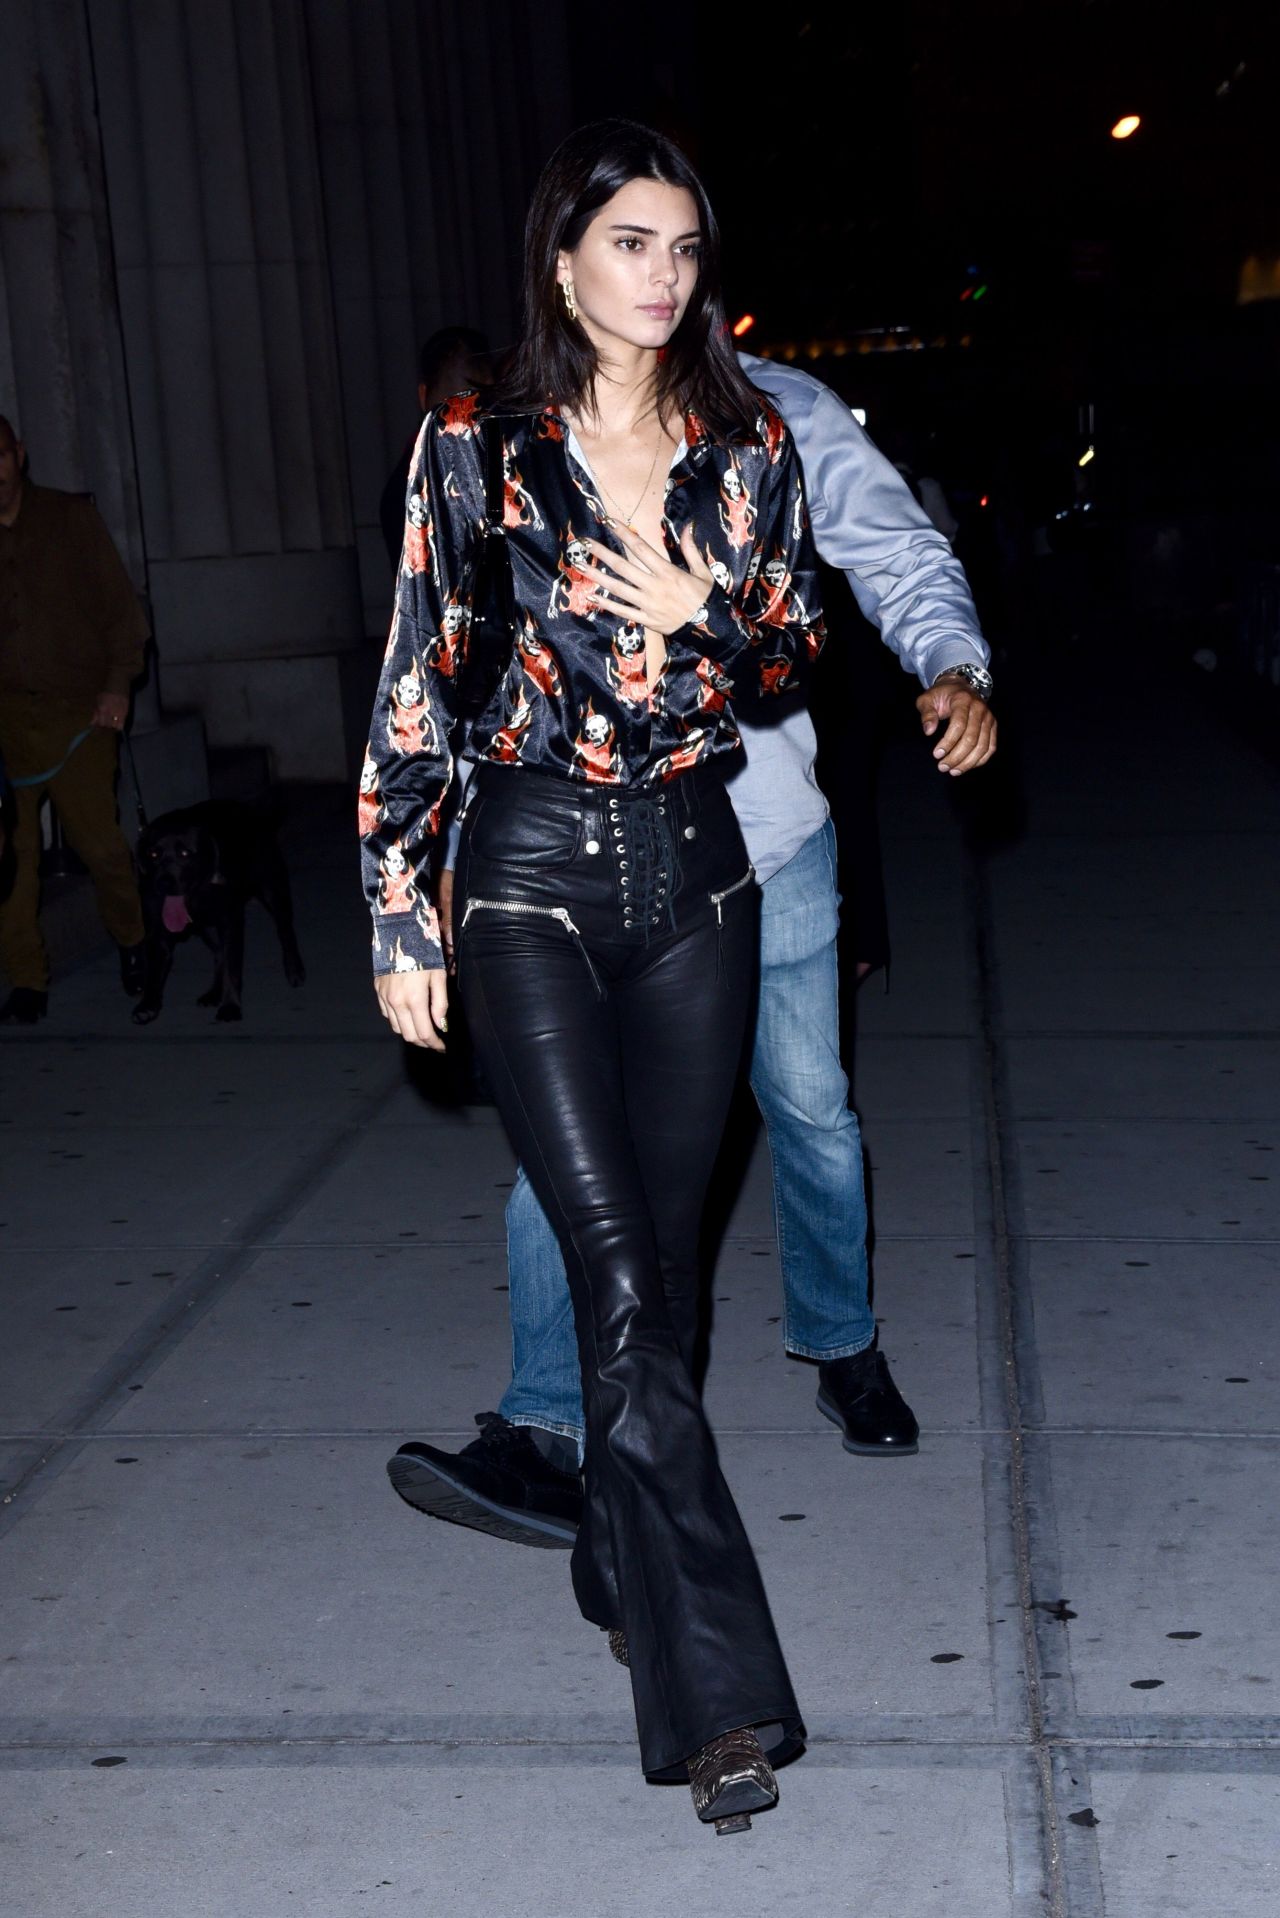 kendall-jenner-night-out-style-nobu-in-ny-10-10-2018-4.jpg